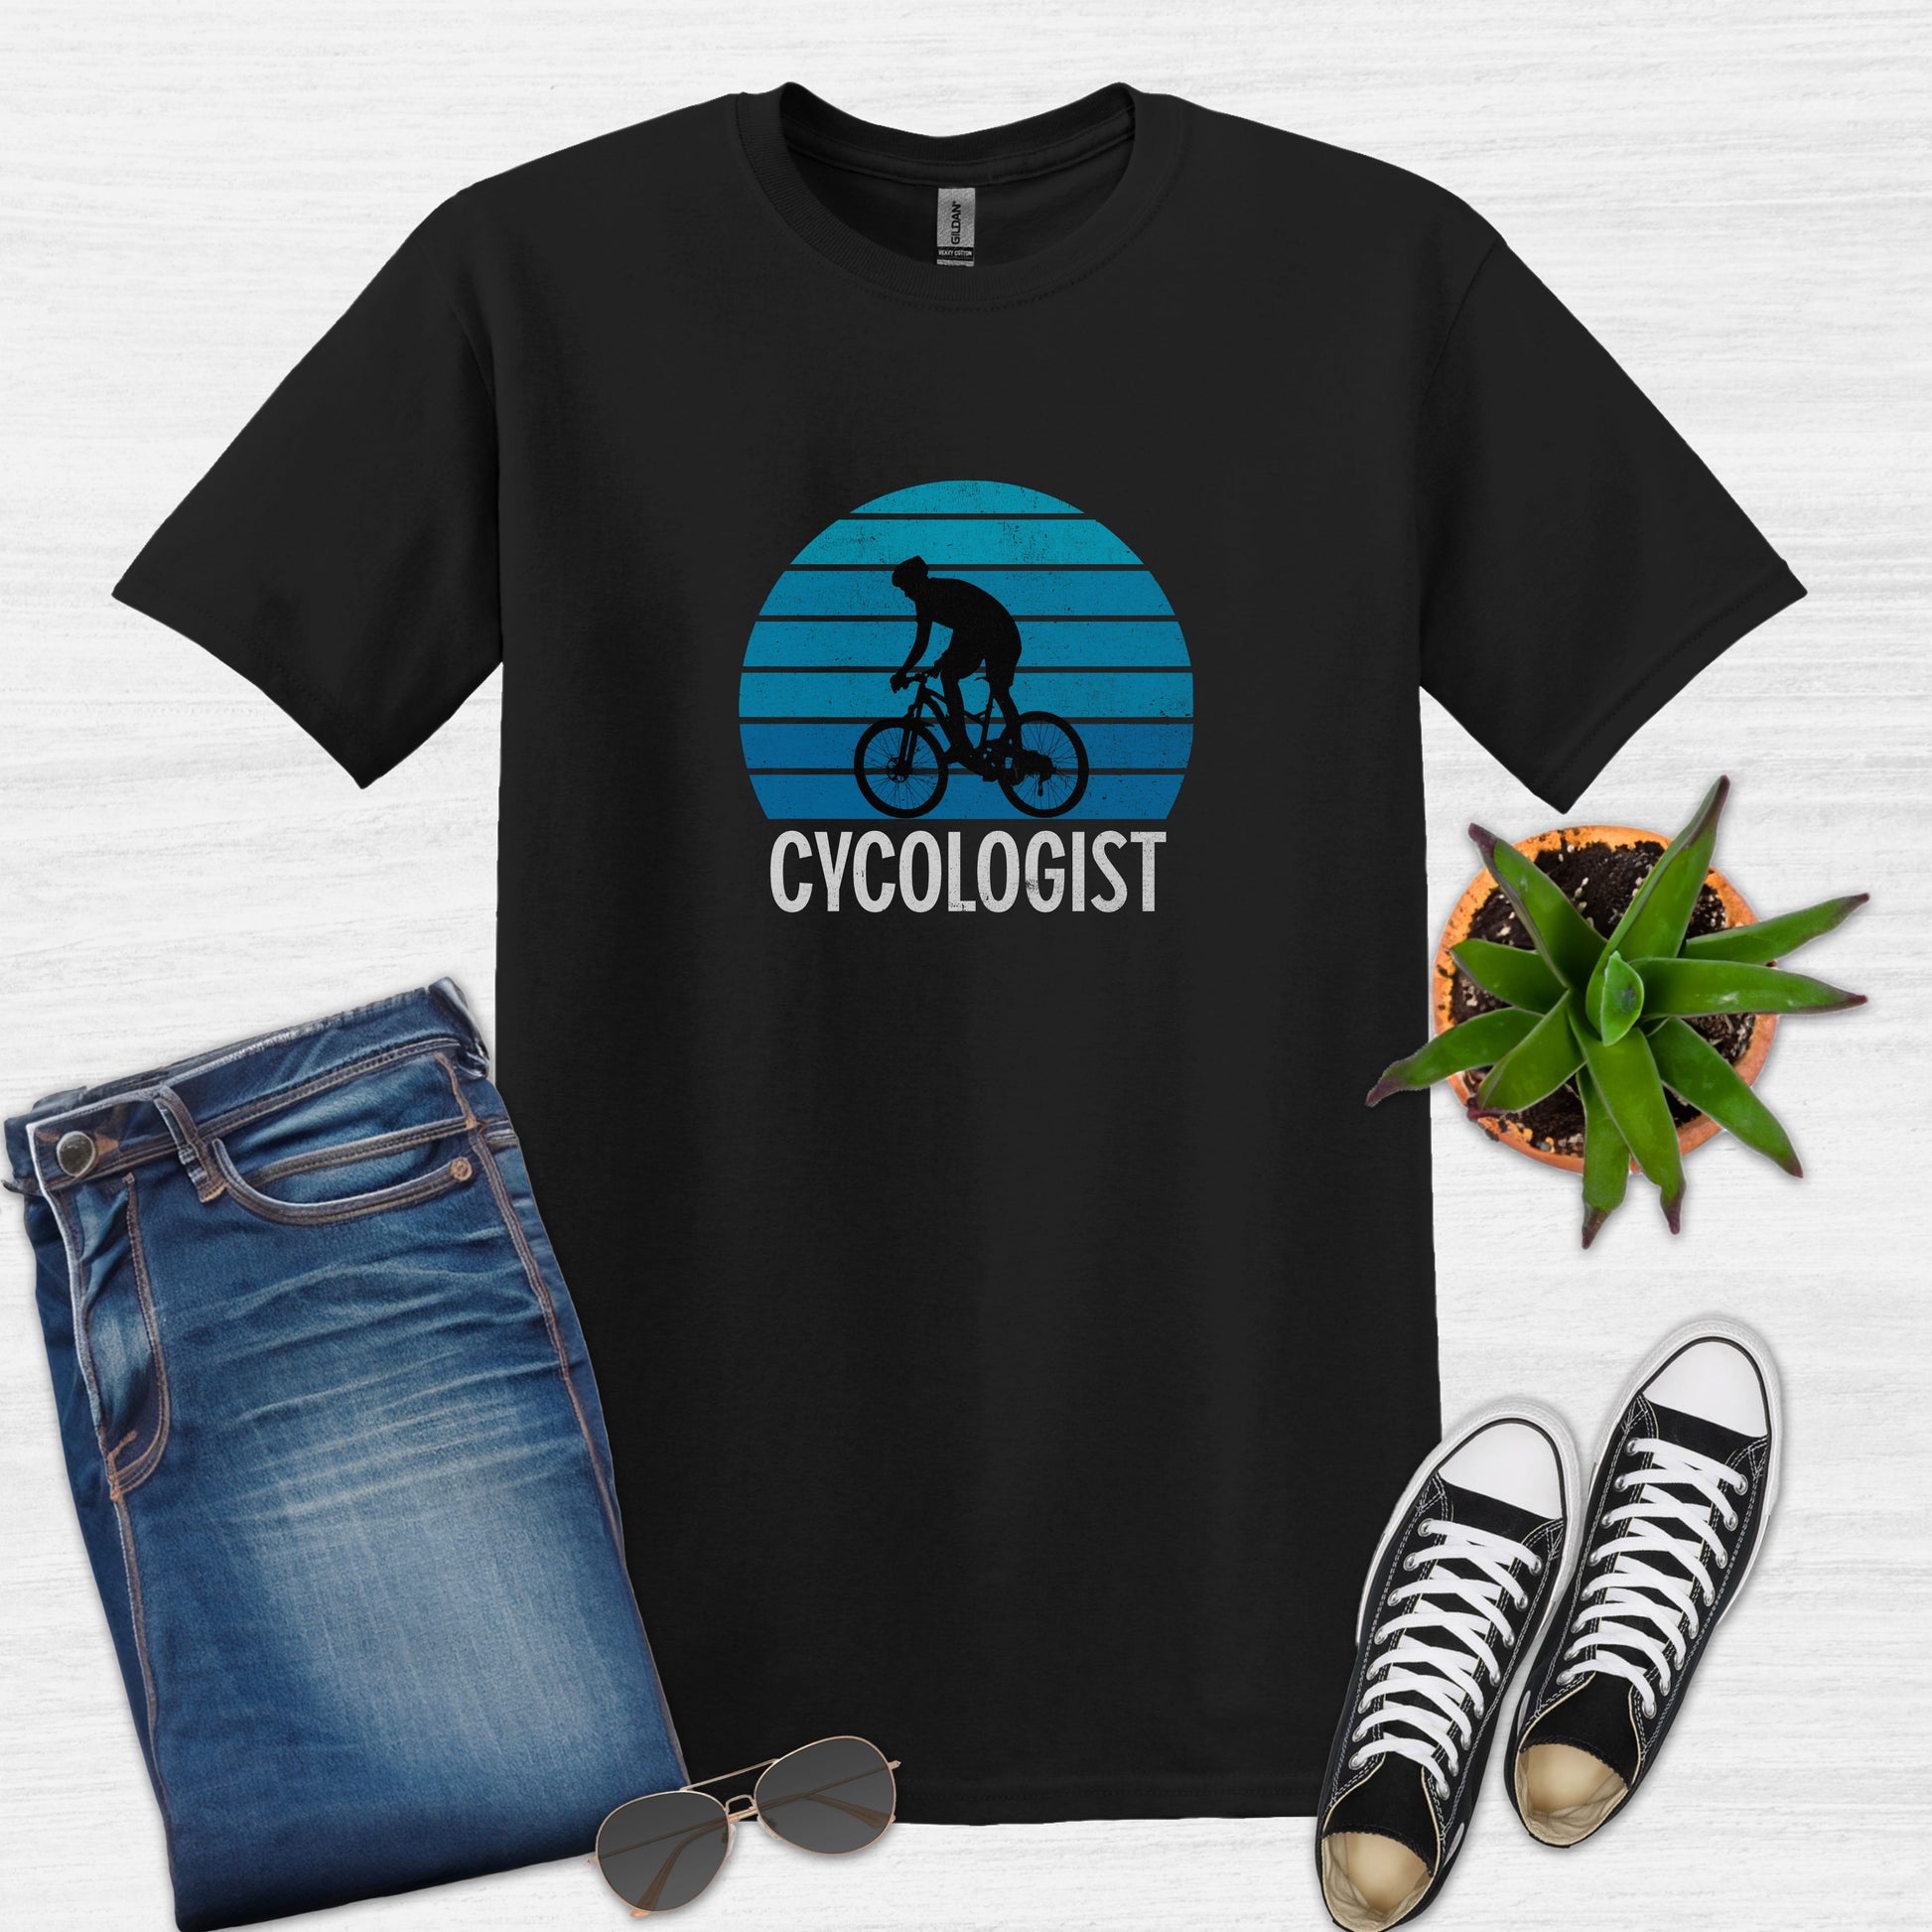 Bike Bliss Cycologist Bicycle T-Shirt for Men Vintage Style Black